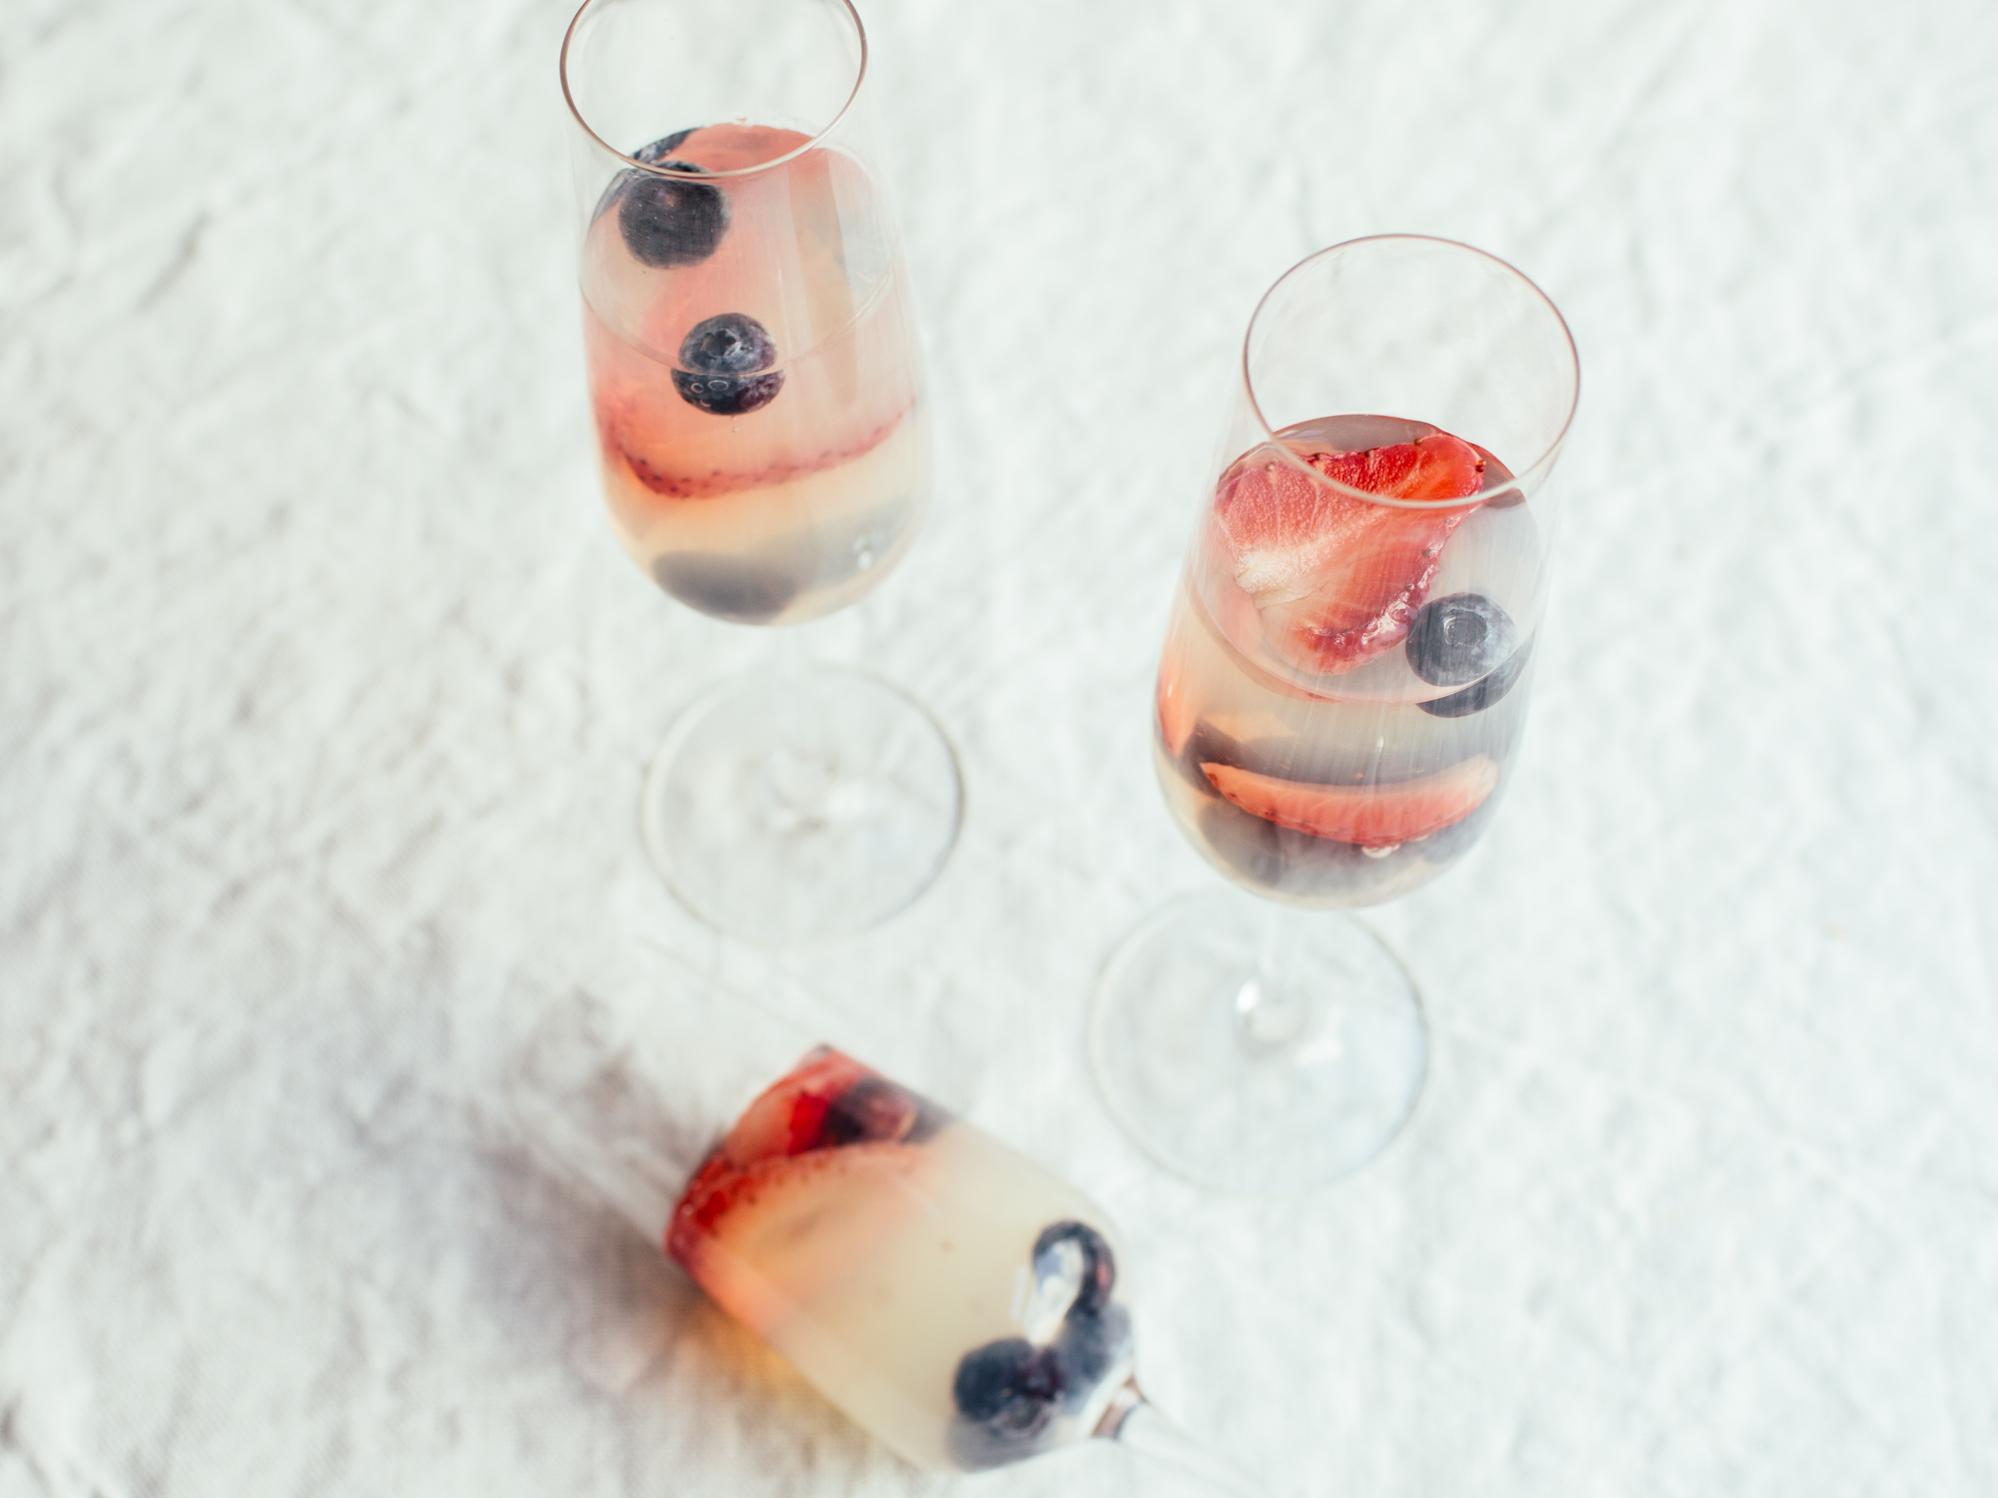  Juicy berries suspended in a crystal clear jelly - a feast for the eyes as well as the taste buds.